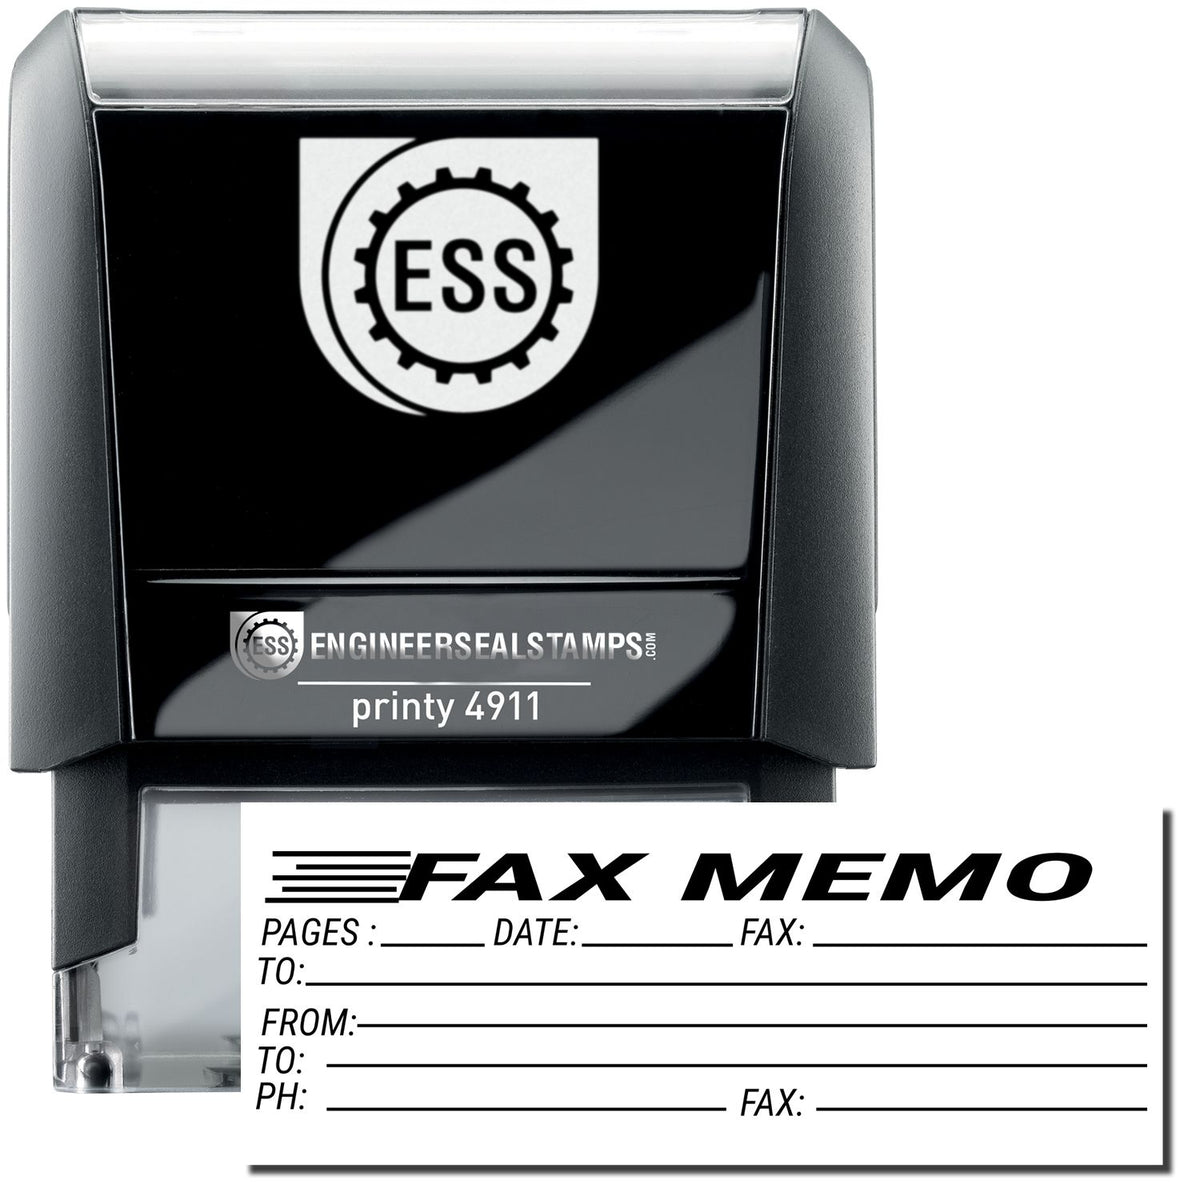 A self-inking stamp with a stamped image showing how the text &quot;FAX MEMO&quot; (with spaces underneath to indicate the number of pages, date, fax information, and who the fax is being sent to) is displayed after stamping.